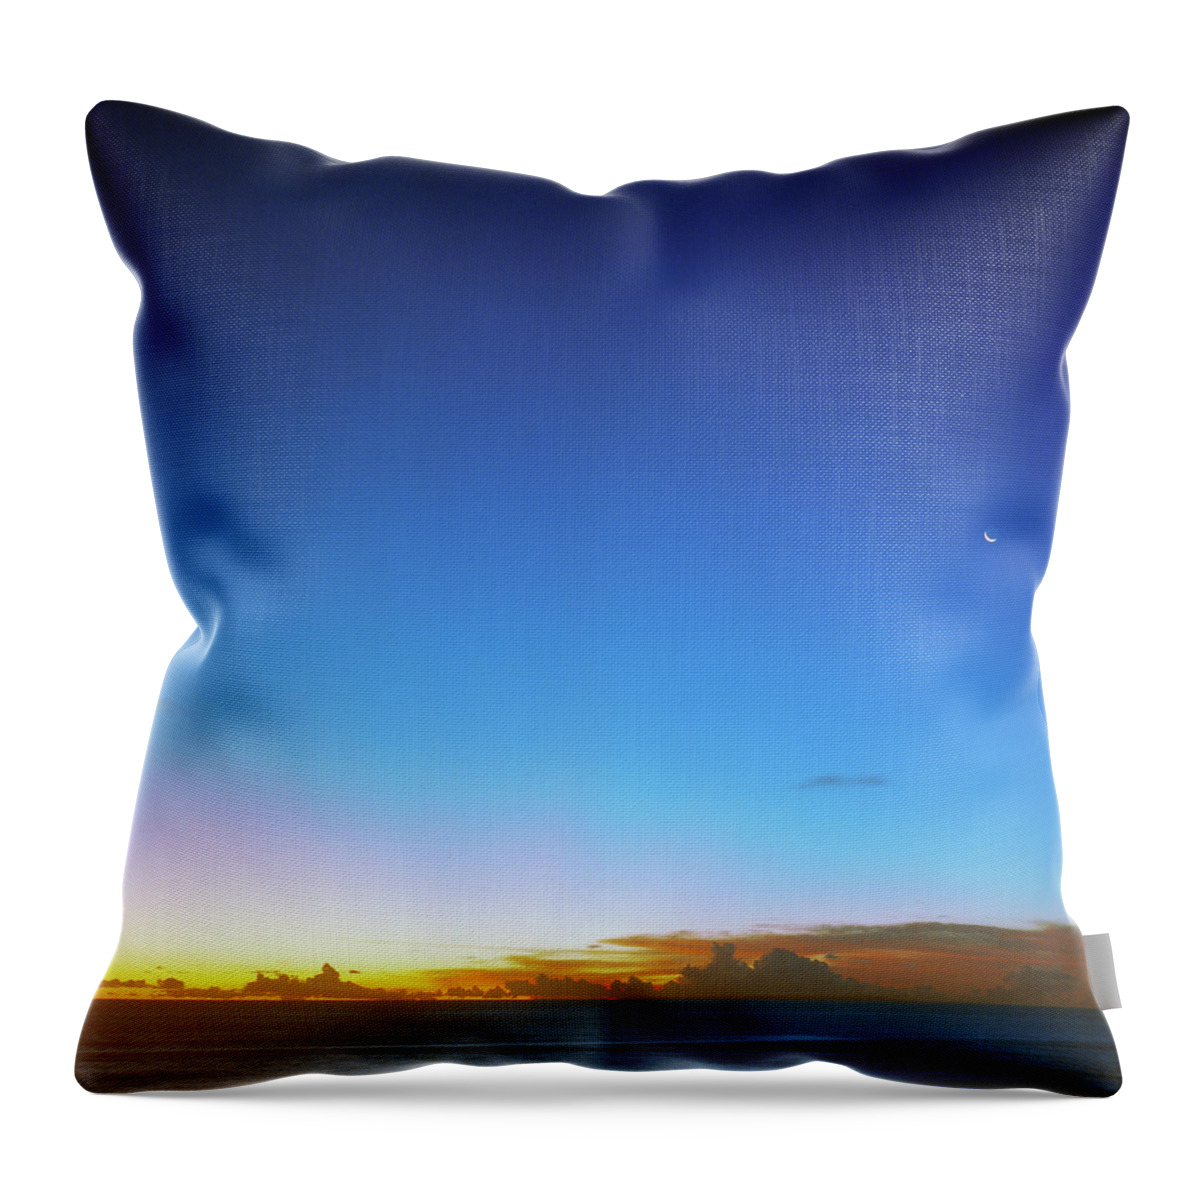 Tranquility Throw Pillow featuring the photograph Sunset And Moon At Uluwatu by Vsevolod Vlasenko